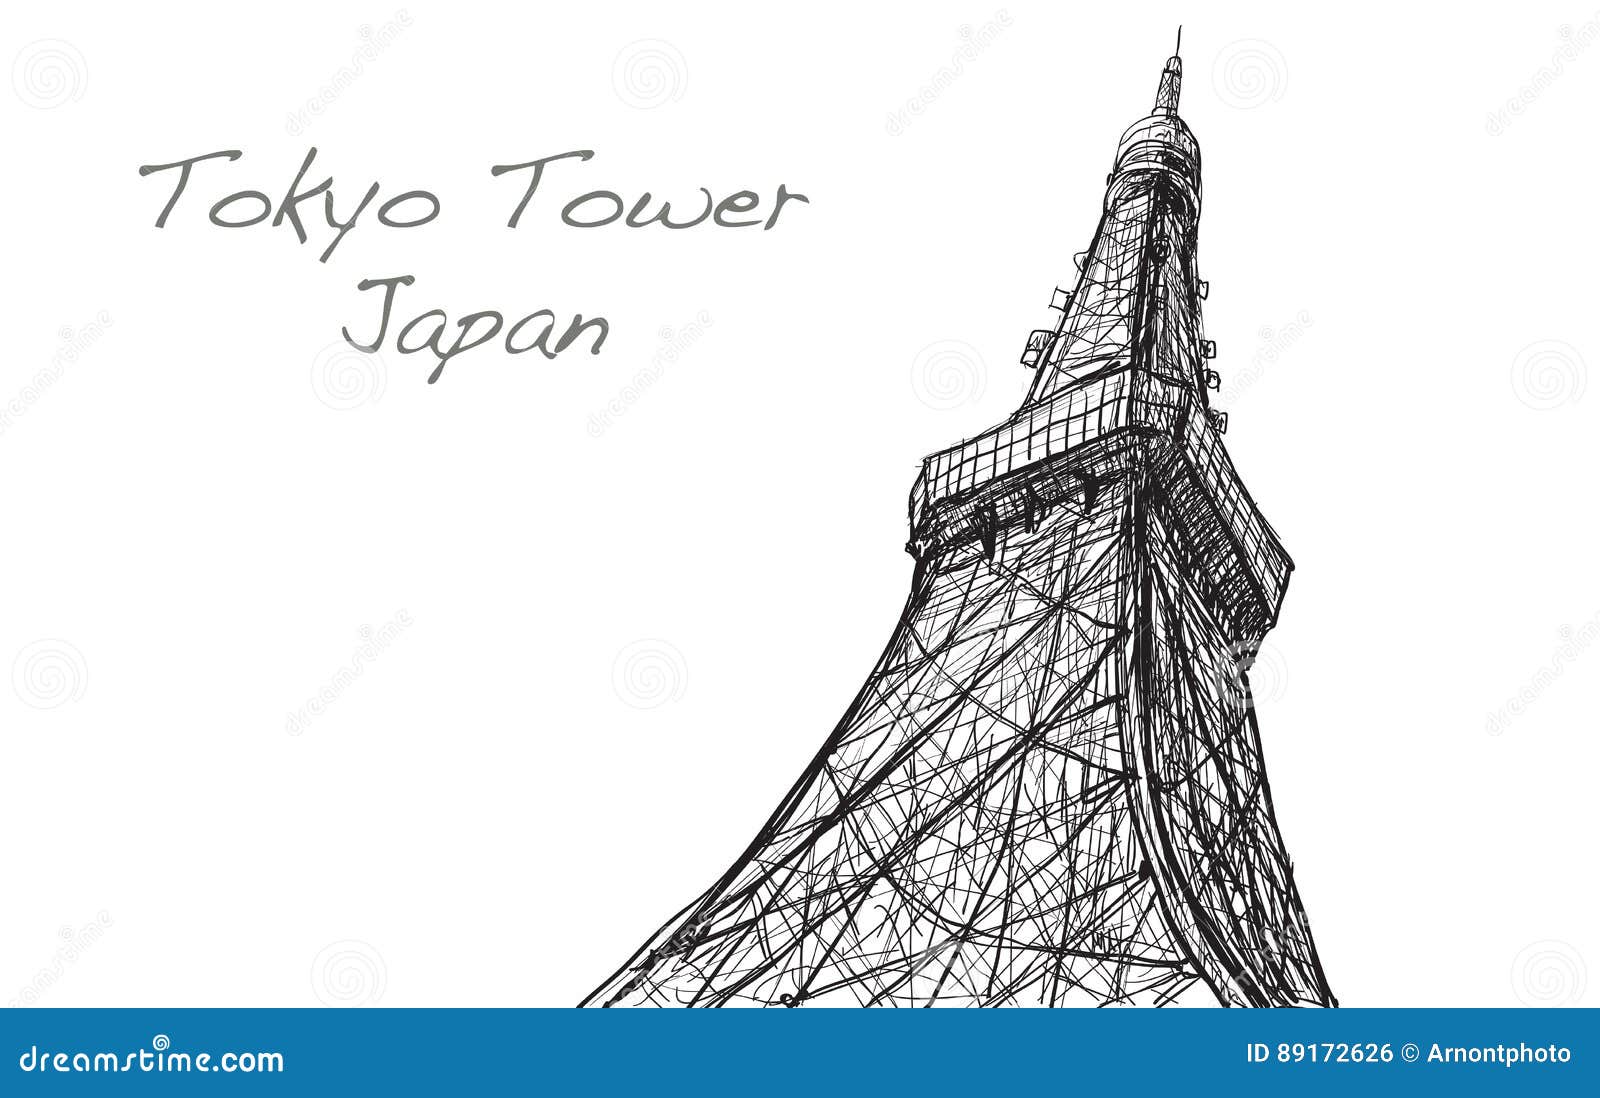 How to Draw The Tokyo Tower  YouTube